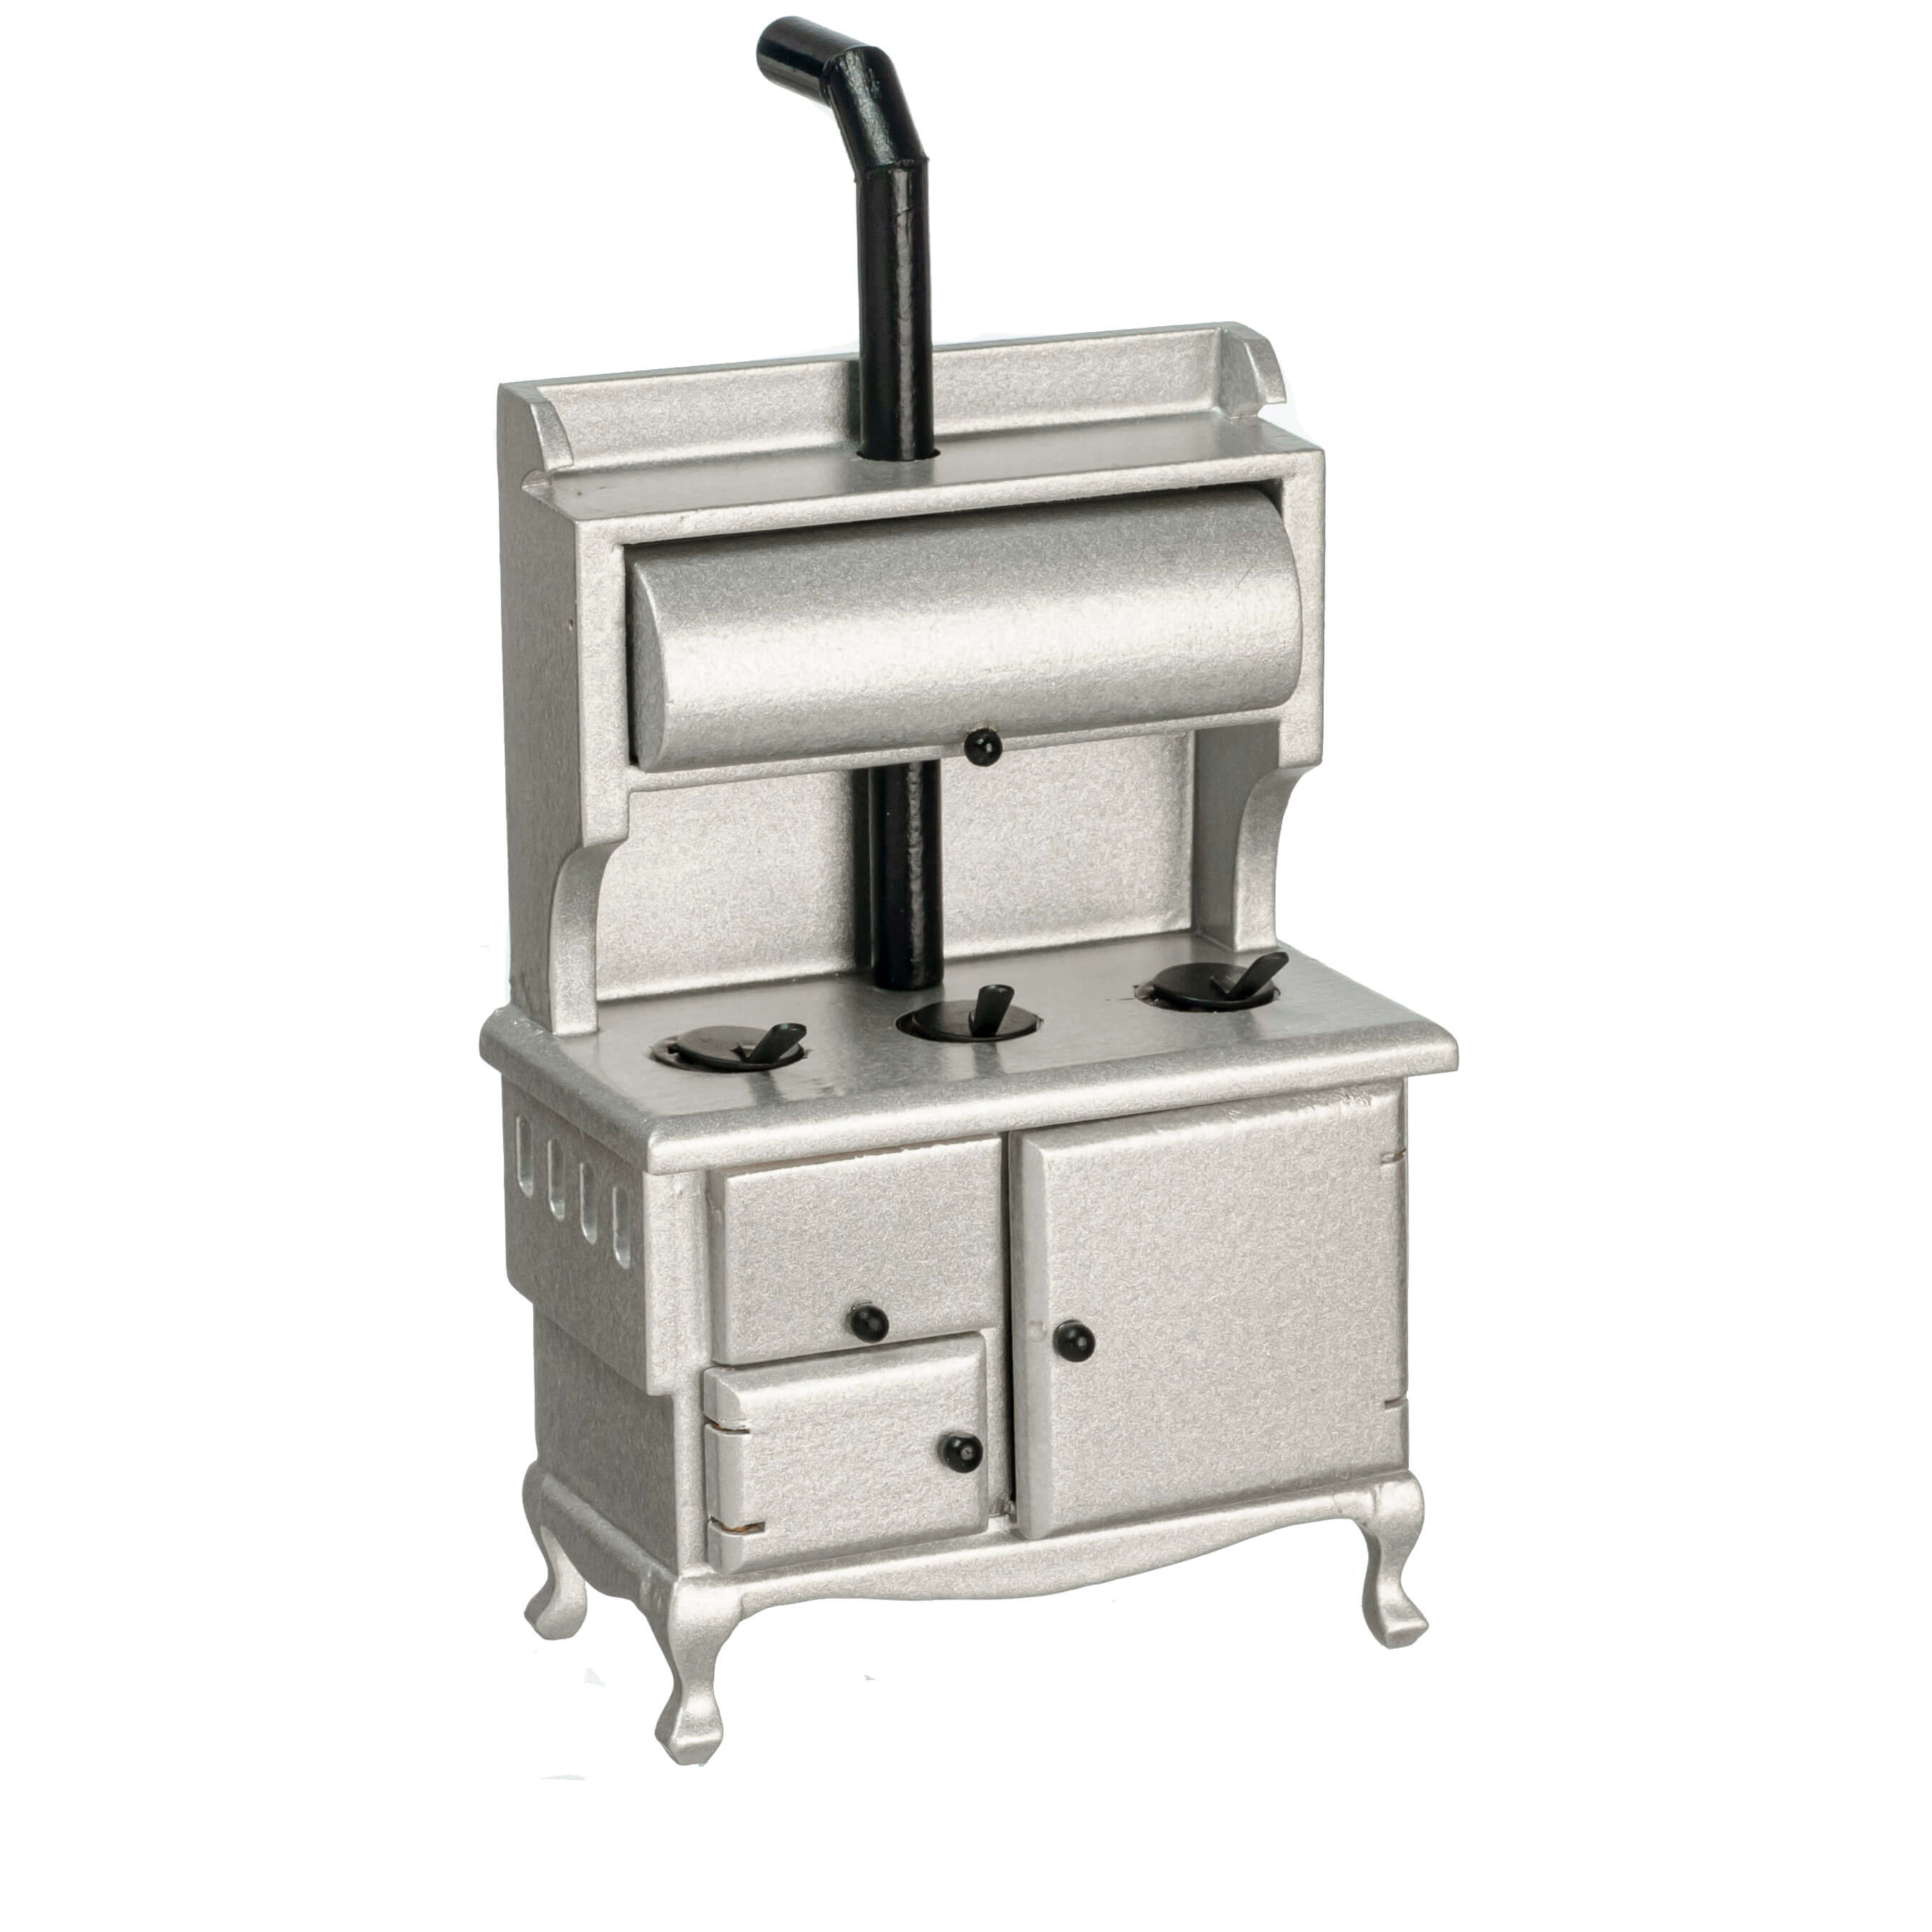 Old Fashioned Wood Stove - Silver